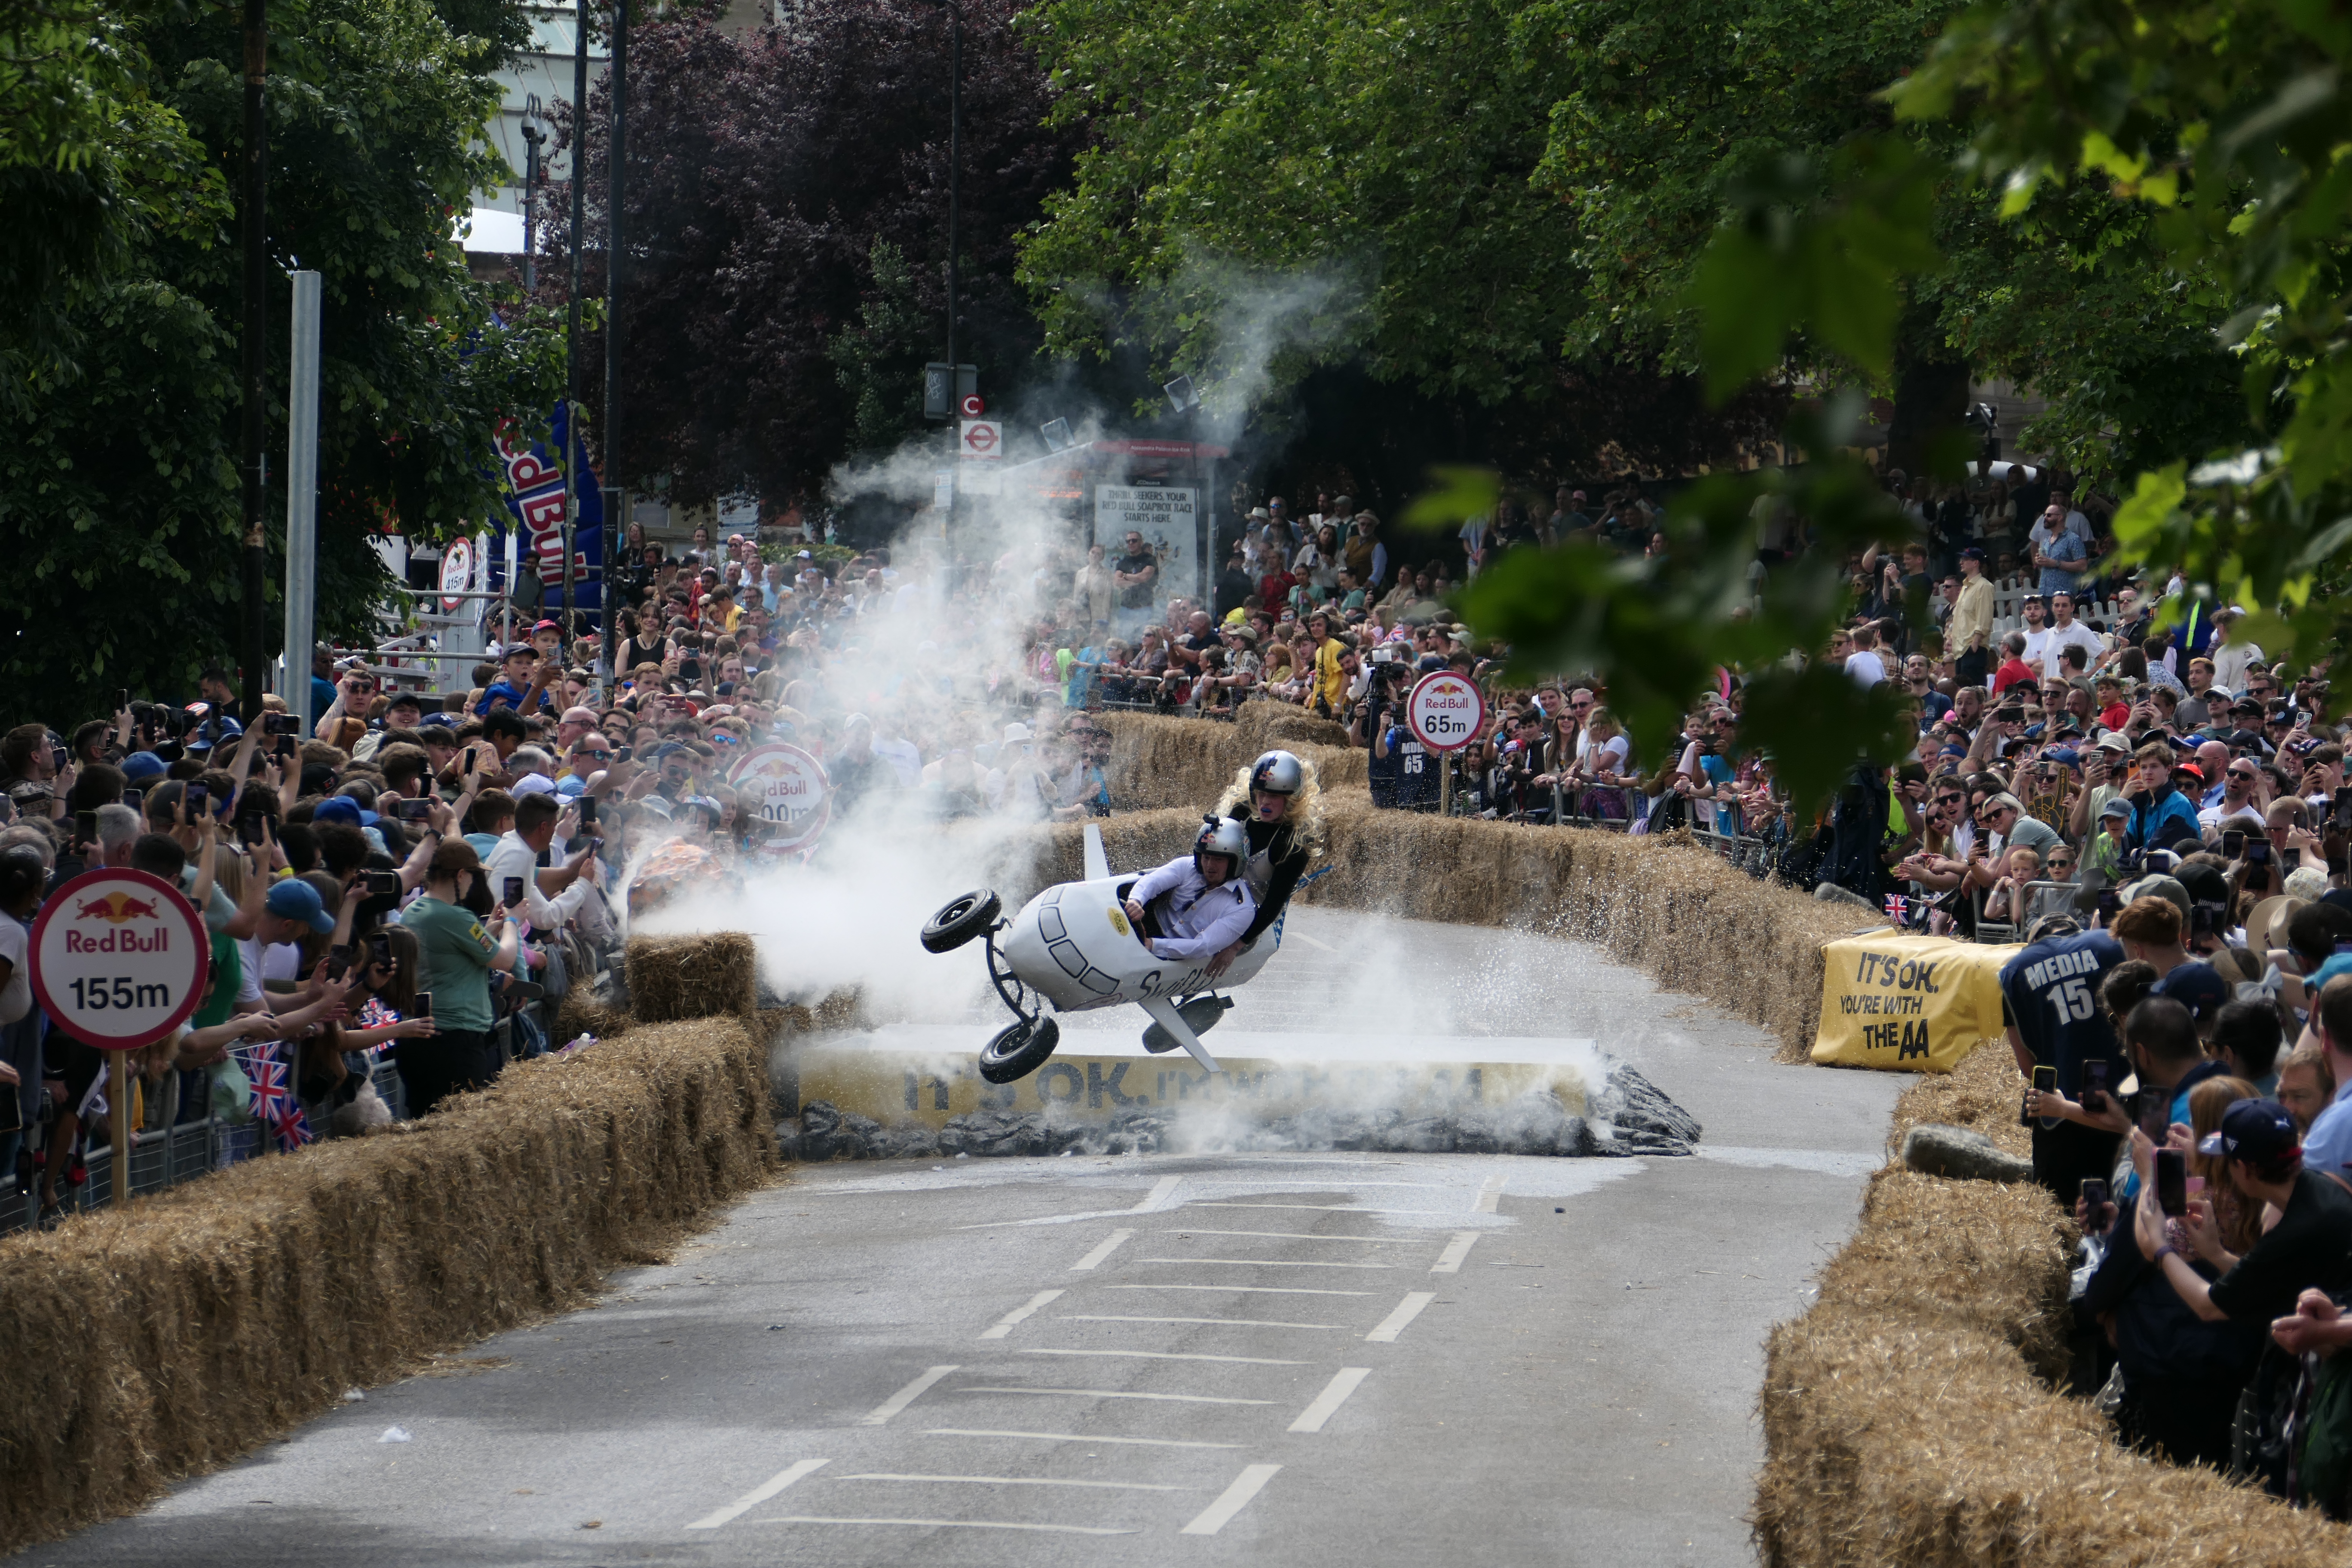 The Swifty Air soapbox in mid air after jumping over a ramp during its run on the course